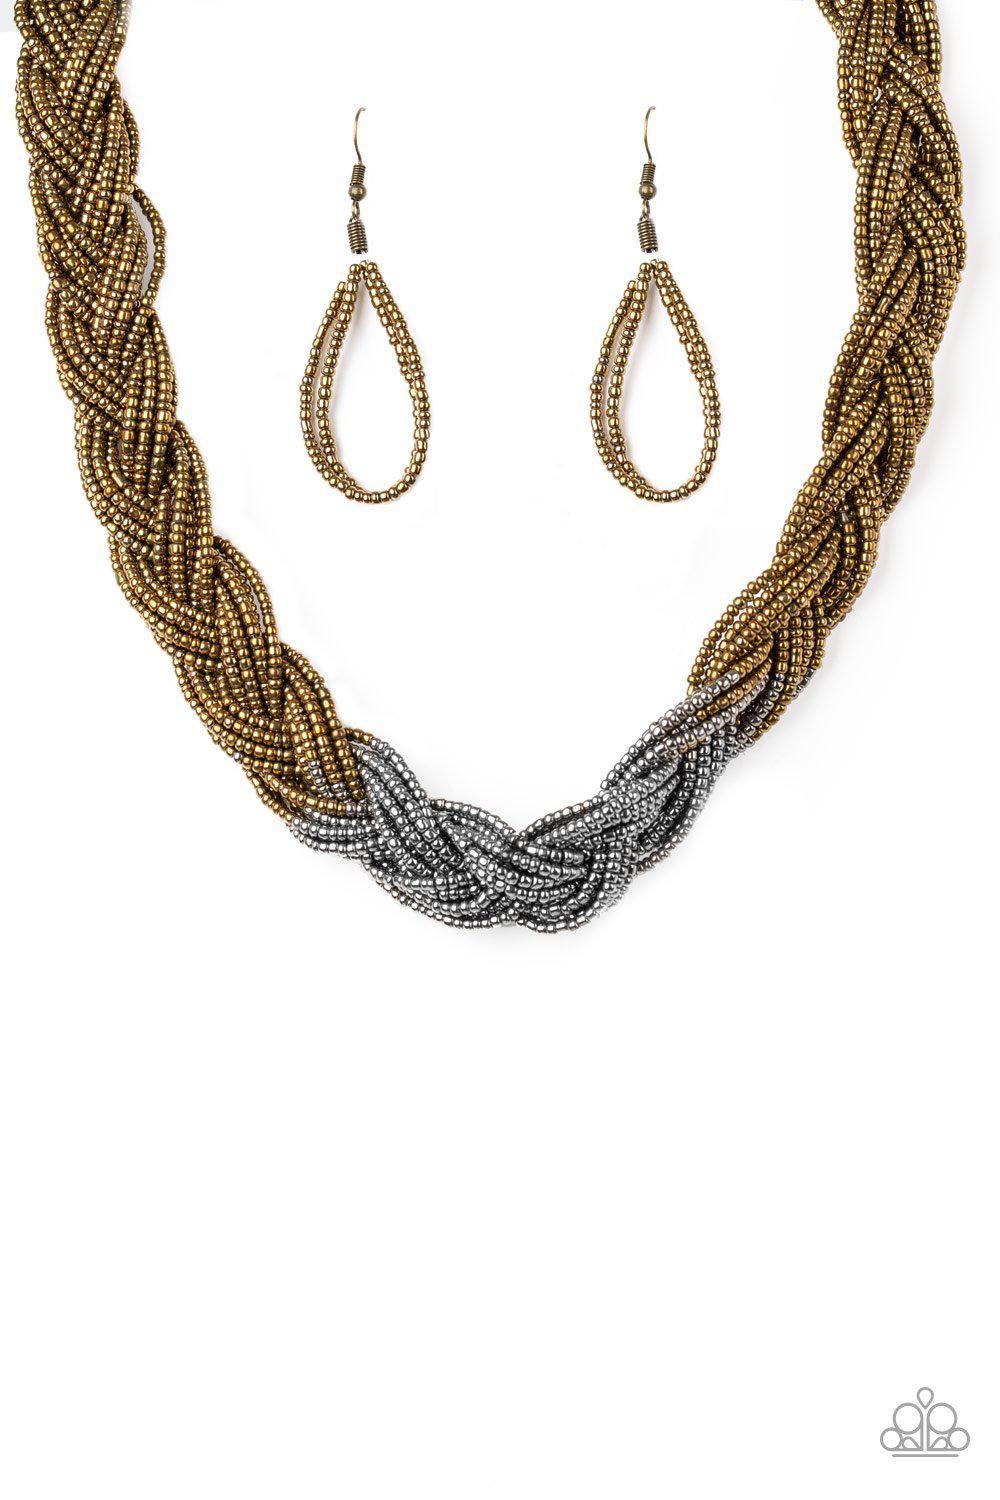 Brazilian Brilliance Multi Brass and Silver Seed Bead Necklace - Paparazzi Accessories - lightbox -CarasShop.com - $5 Jewelry by Cara Jewels